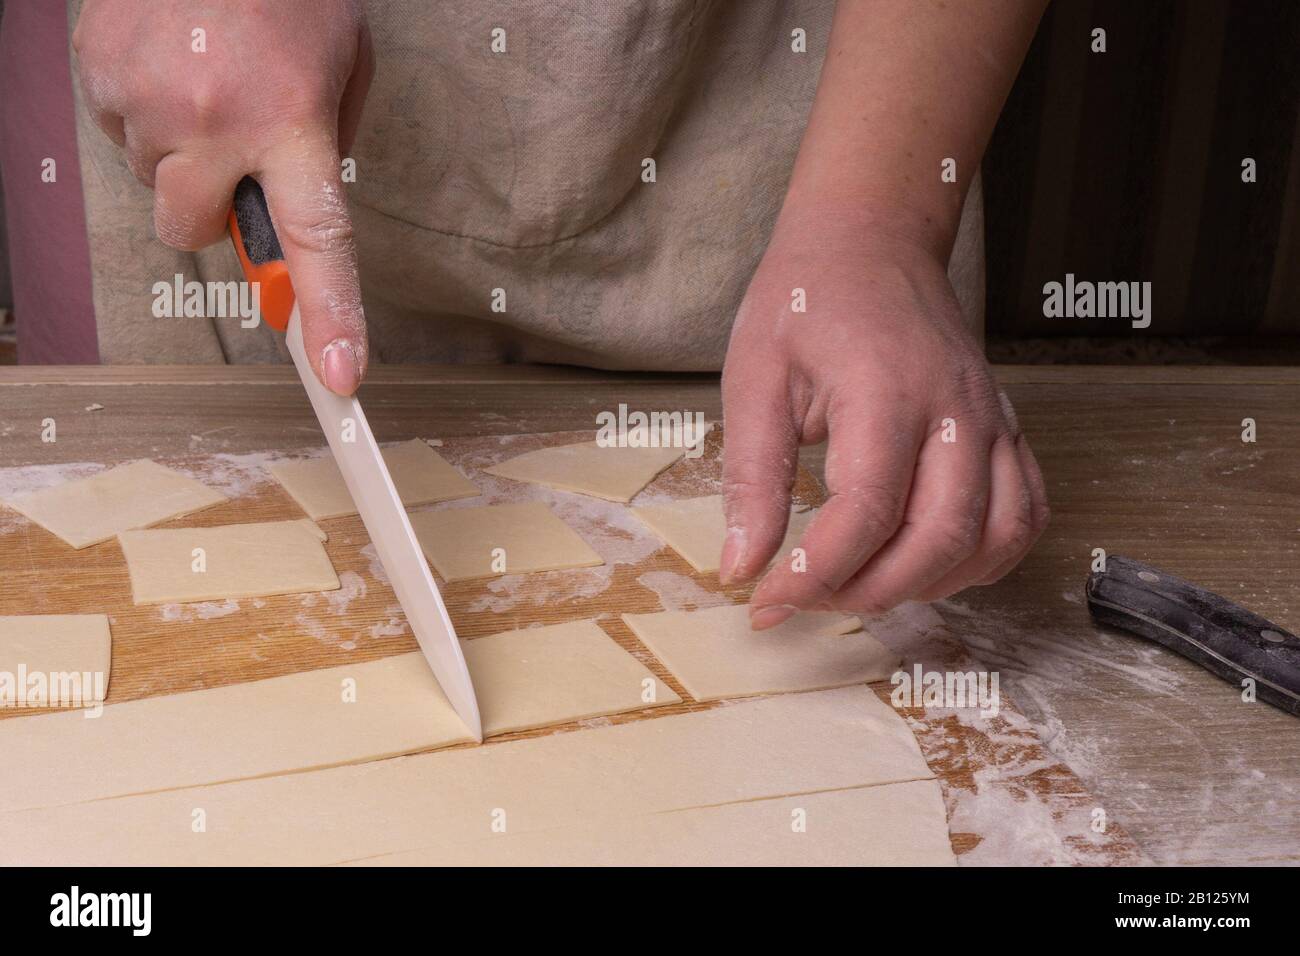 A woman cuts the dough into squares with a white ceramic knife. Plywood cutting board, wooden flour sieve and wooden rolling pin - tools for making Stock Photo